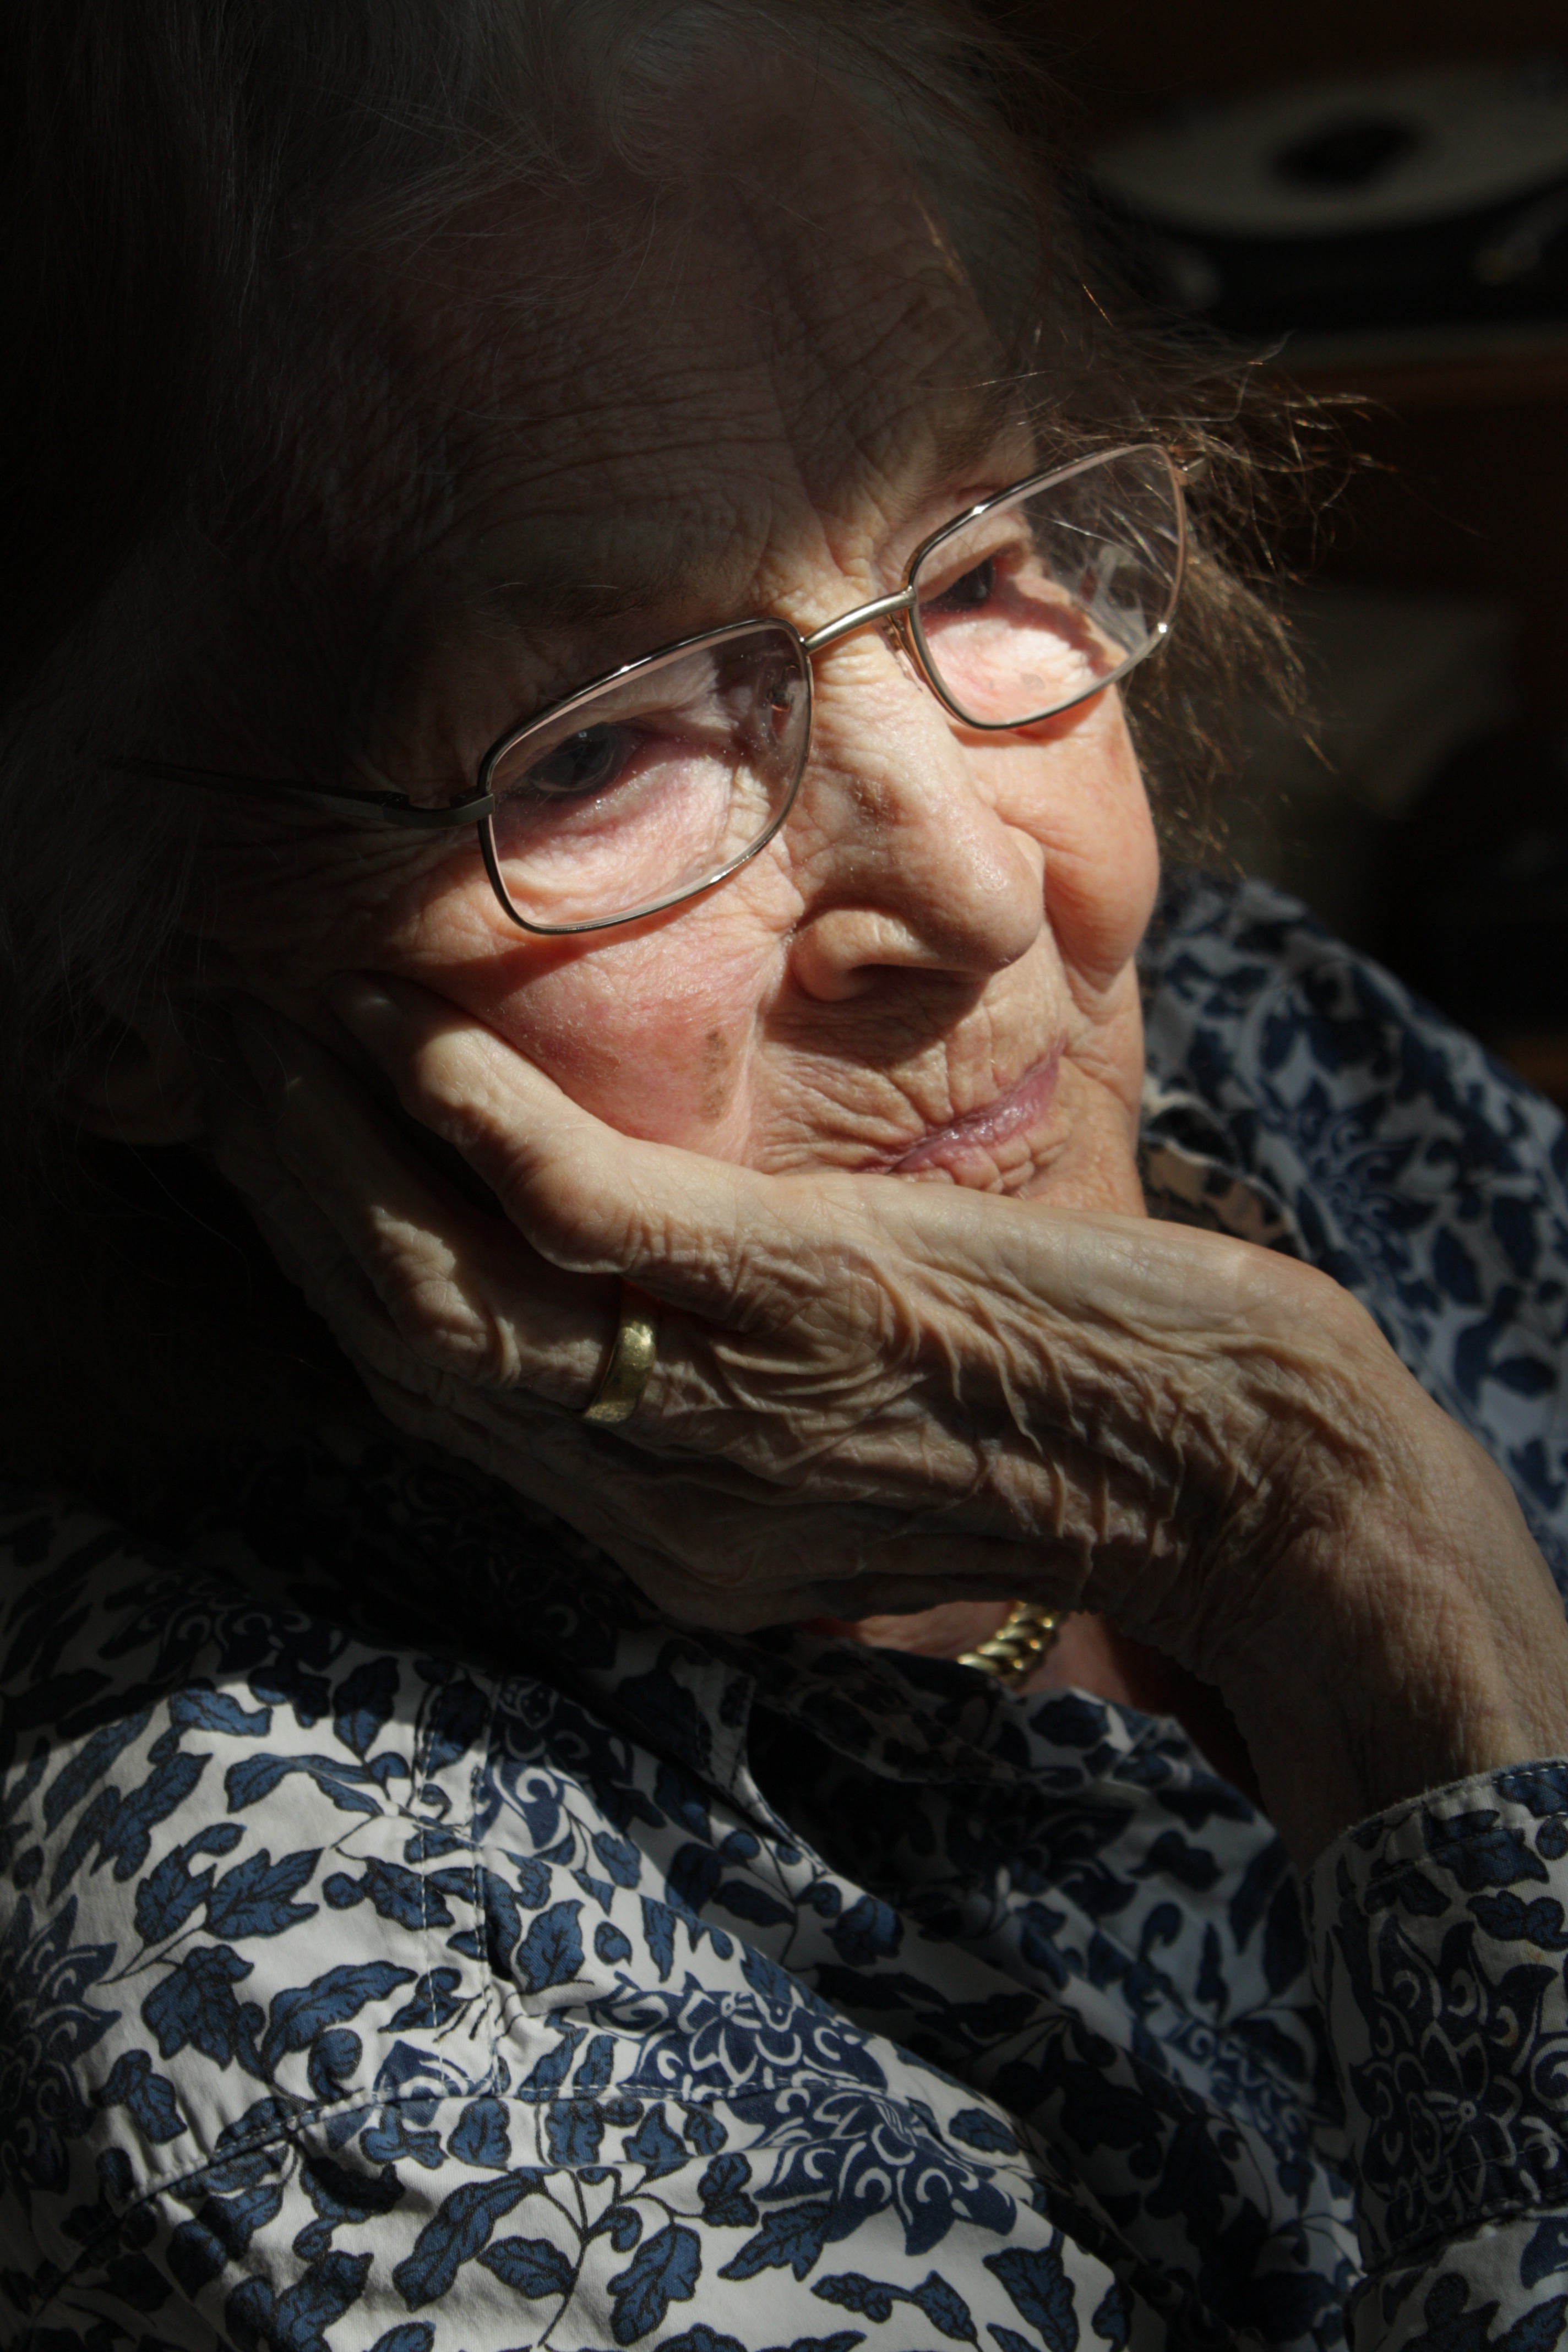 Elderly woman sitting in a ray of light.